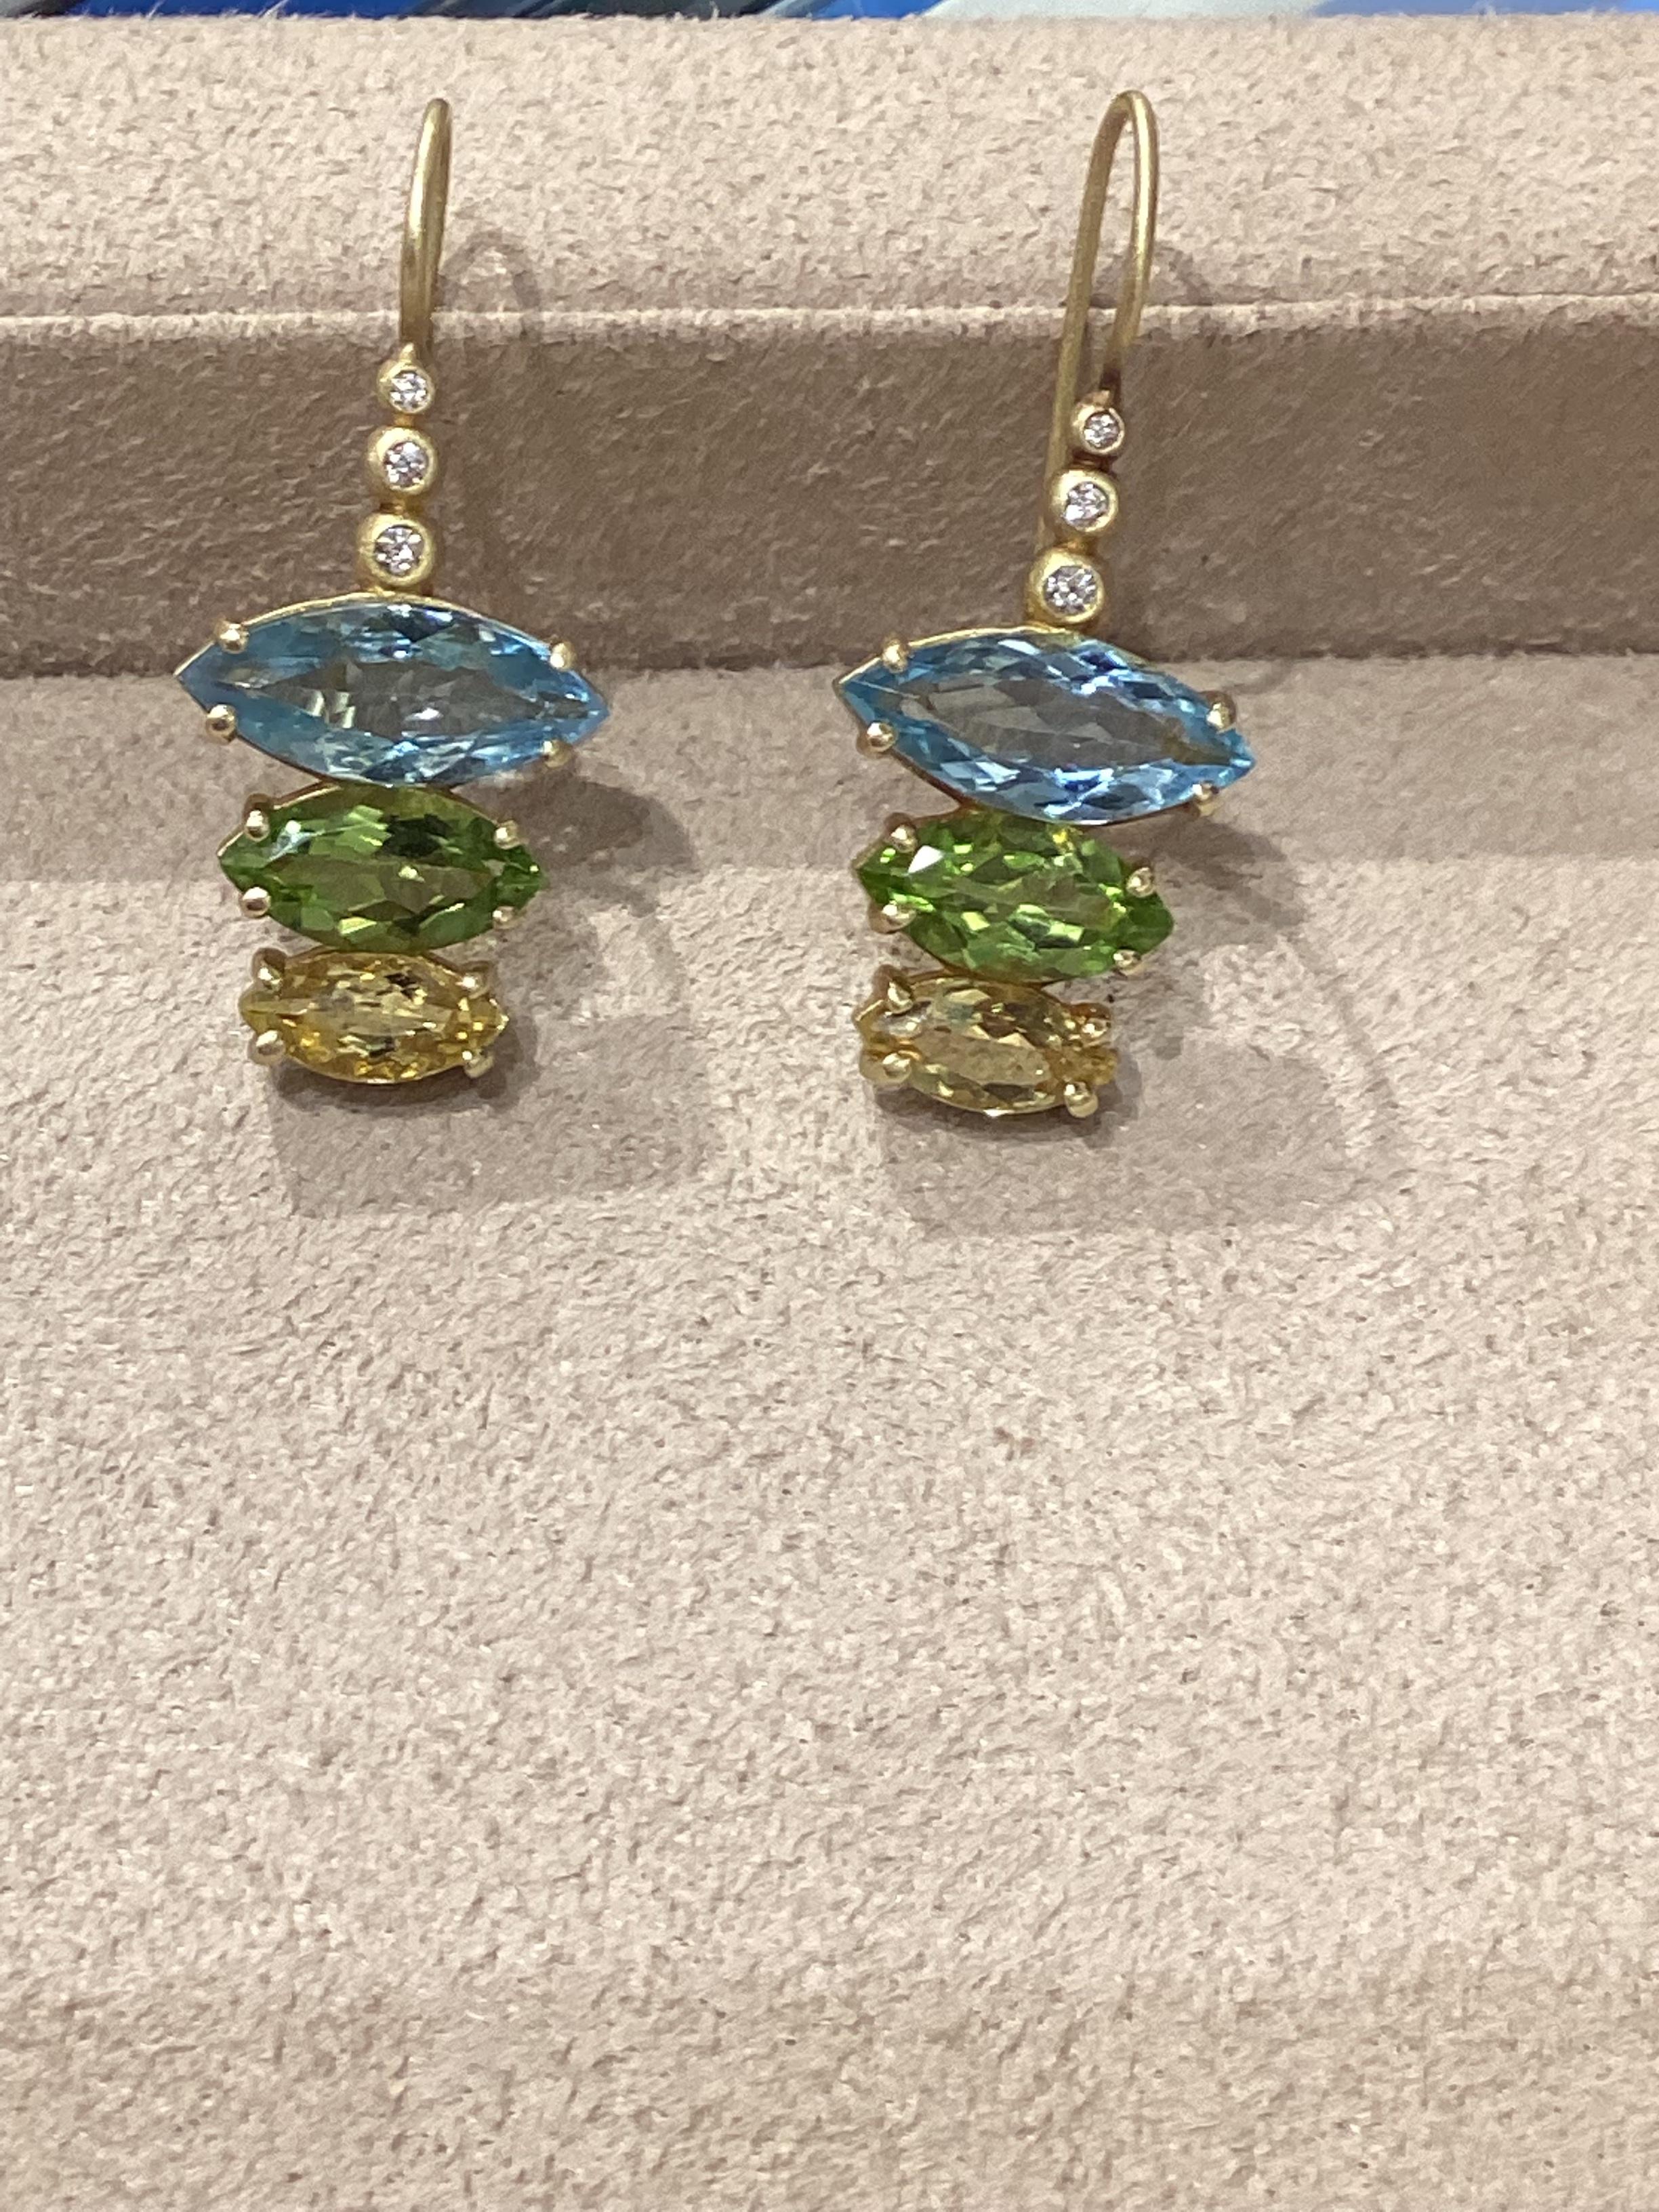 Handcrafted entirely in New York City, the 18k gold, diamond, and gemstone collection is designed to be worn, not stored. It is meant for effortless elegance and easy casual wear. Precious stones may be worn
every day, bright colors can be